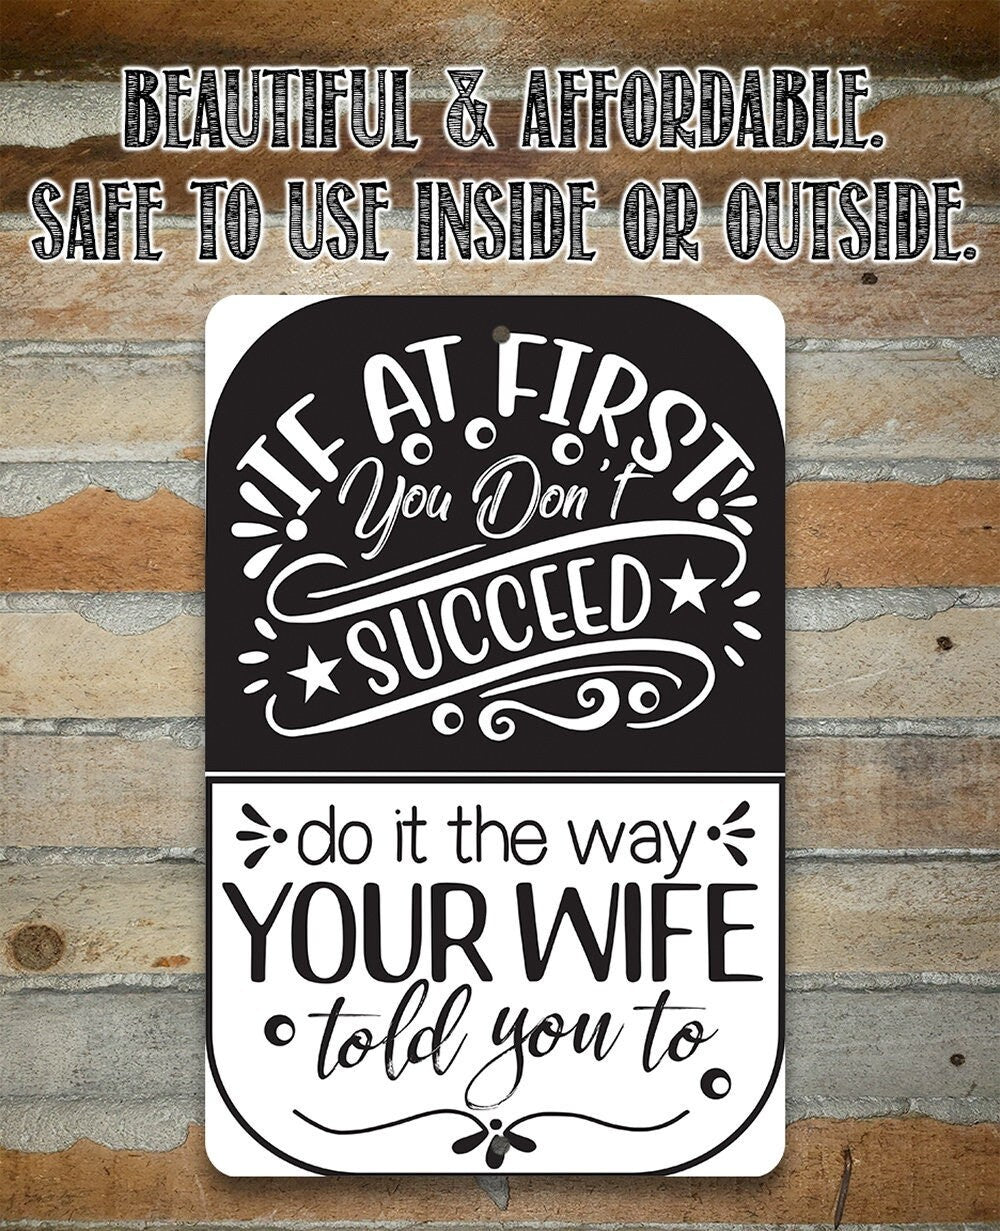 If At First You Don't Succeed, Do It The Way Your Wife Told You To - 8" x 12" or 12" x 18" Aluminum Tin Awesome Metal Poster Lone Star Art 